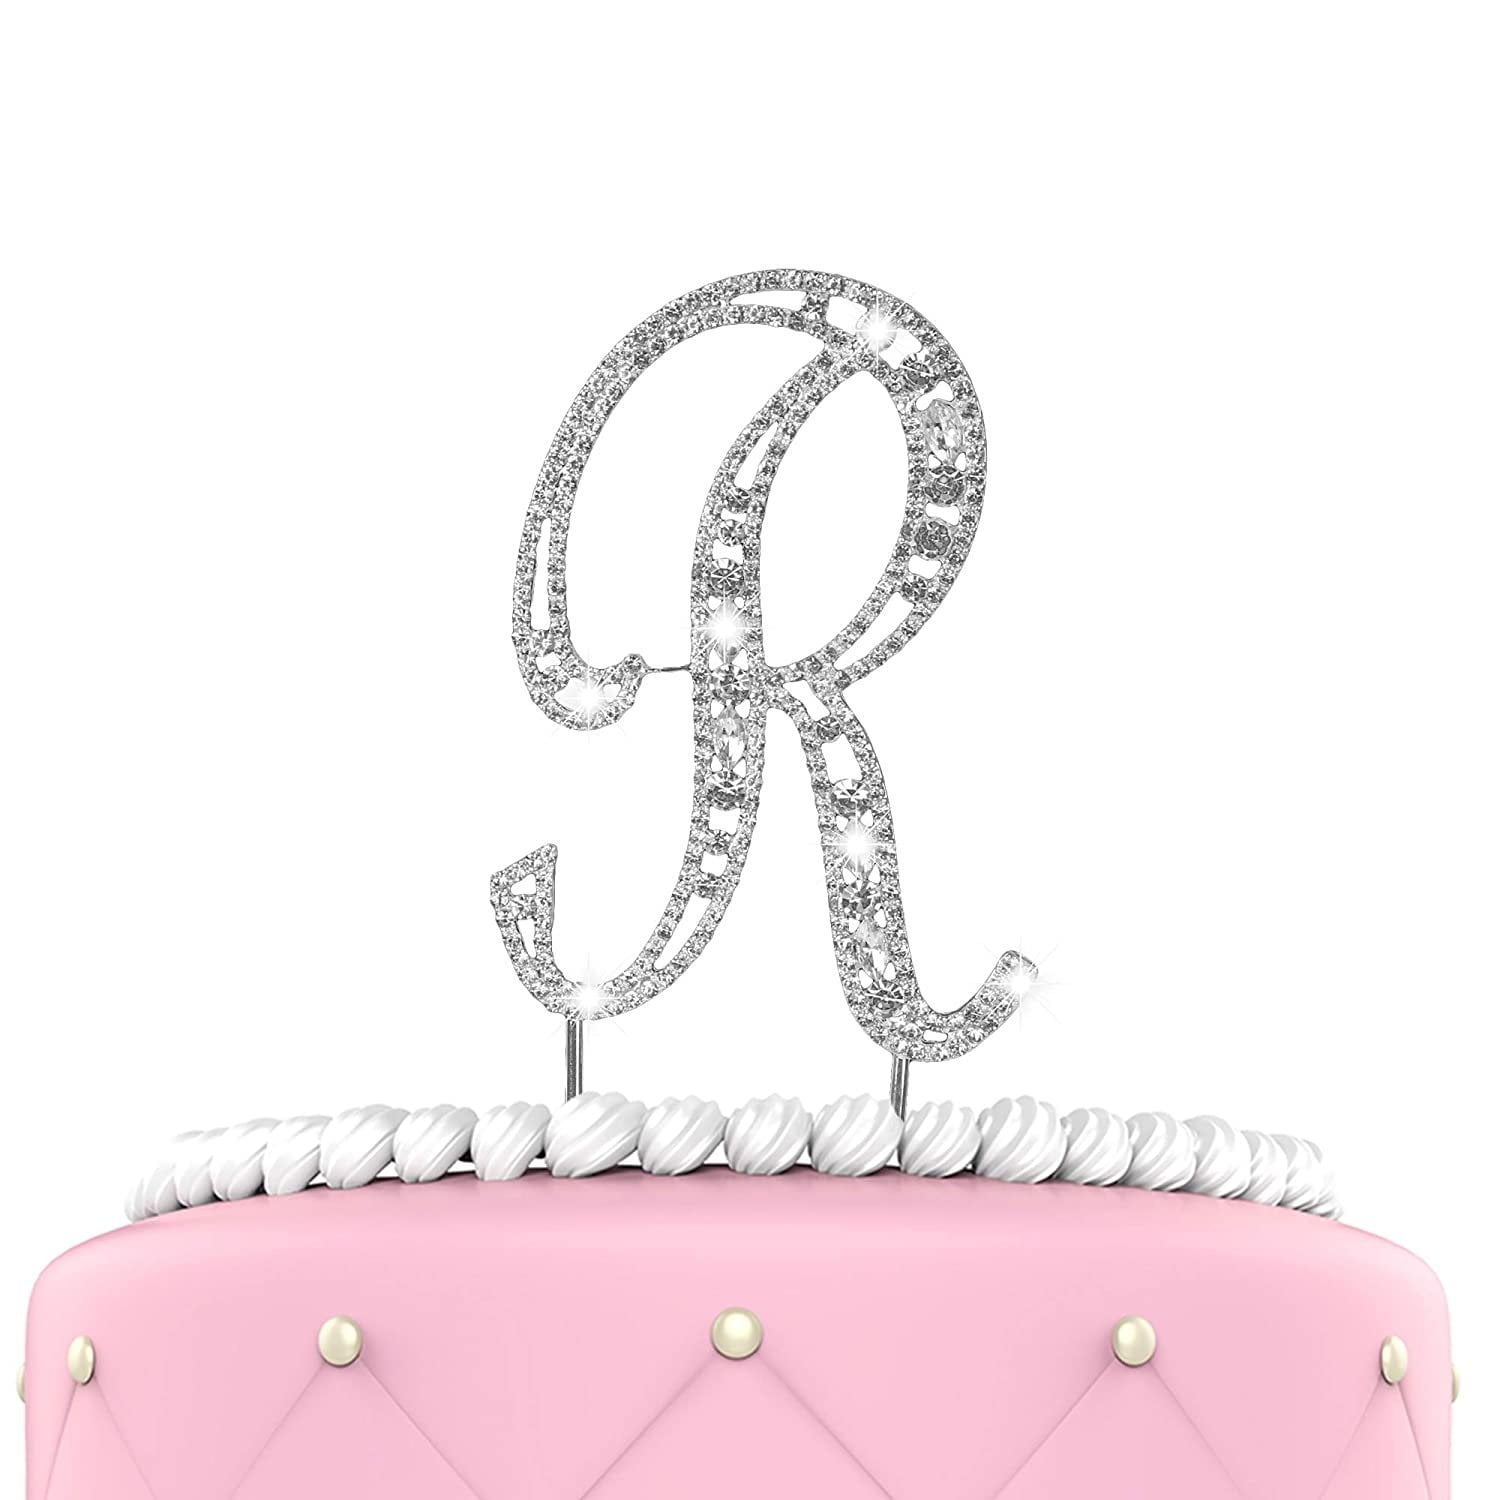 Amazon.com: 21 Cake Topper - Premium Rose Gold Metal. 21st Bday 21 and  Fabulous Rhinestone Birthday Cake Topper Makes a Great Centerpiece, Birthday  Party Decoration, and Keepsake - Now in a Protective